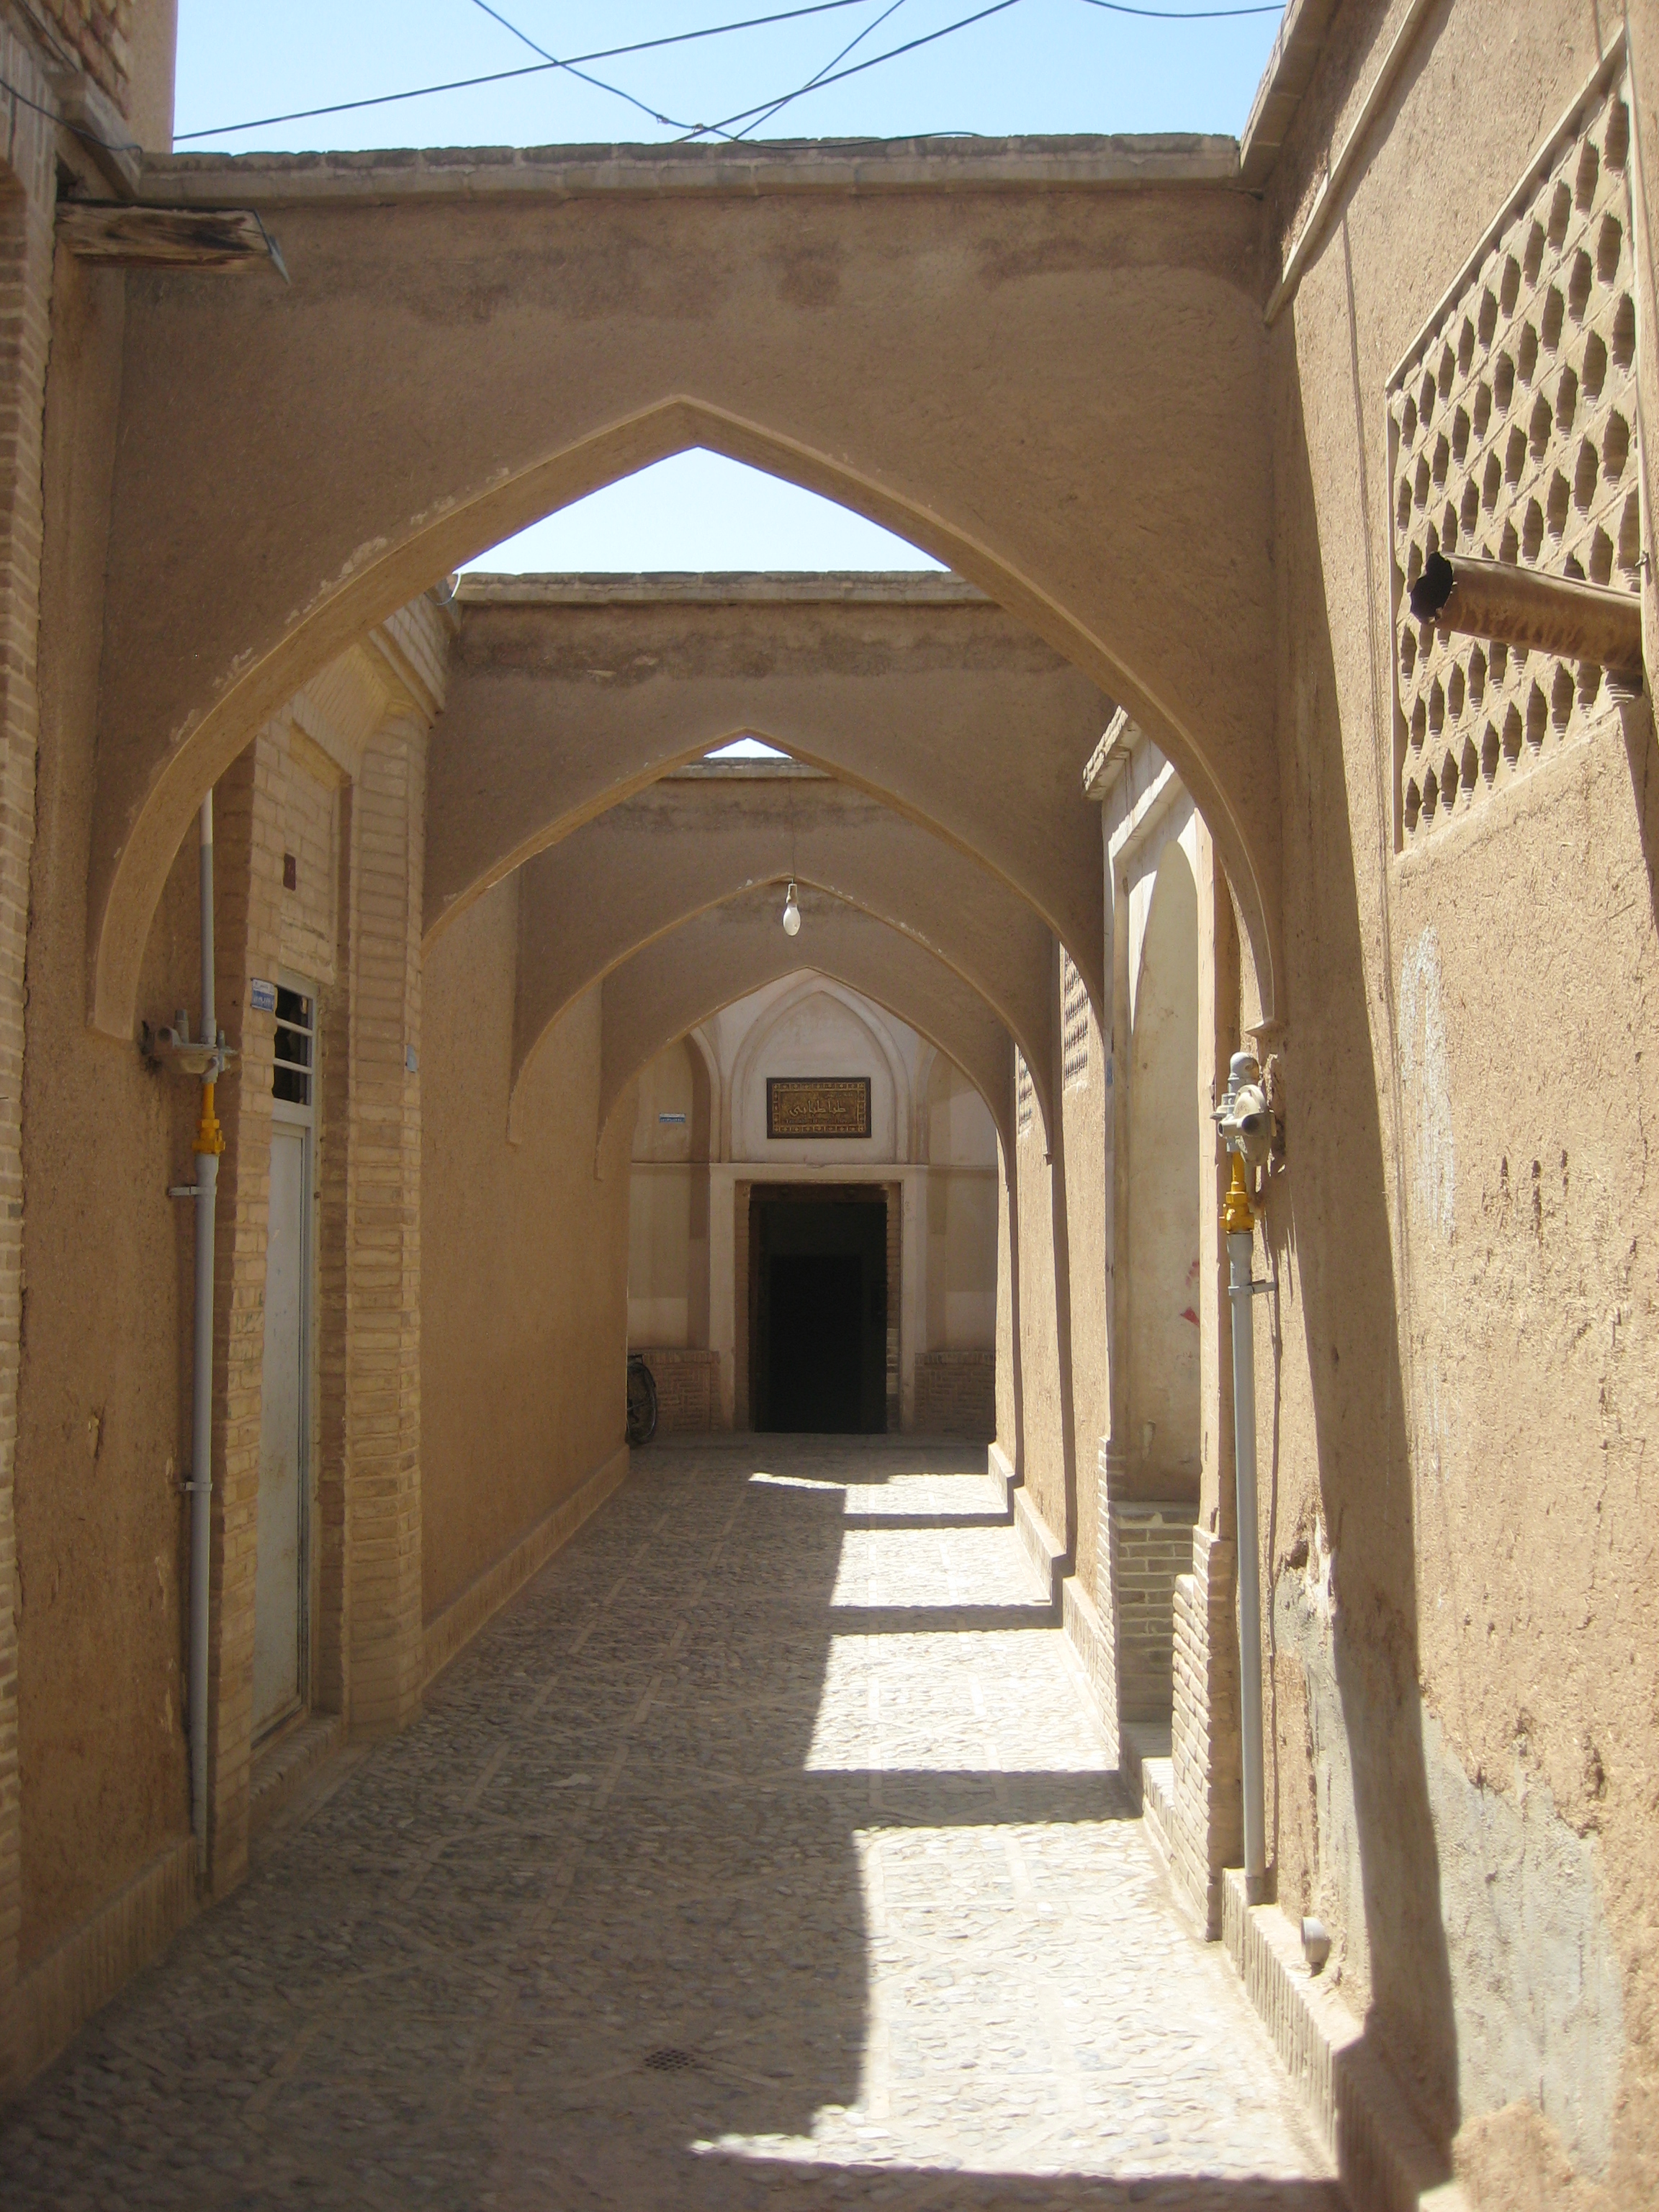 File:Historic House Entrance in Kashan Iran.jpg - Wikimedia Commons